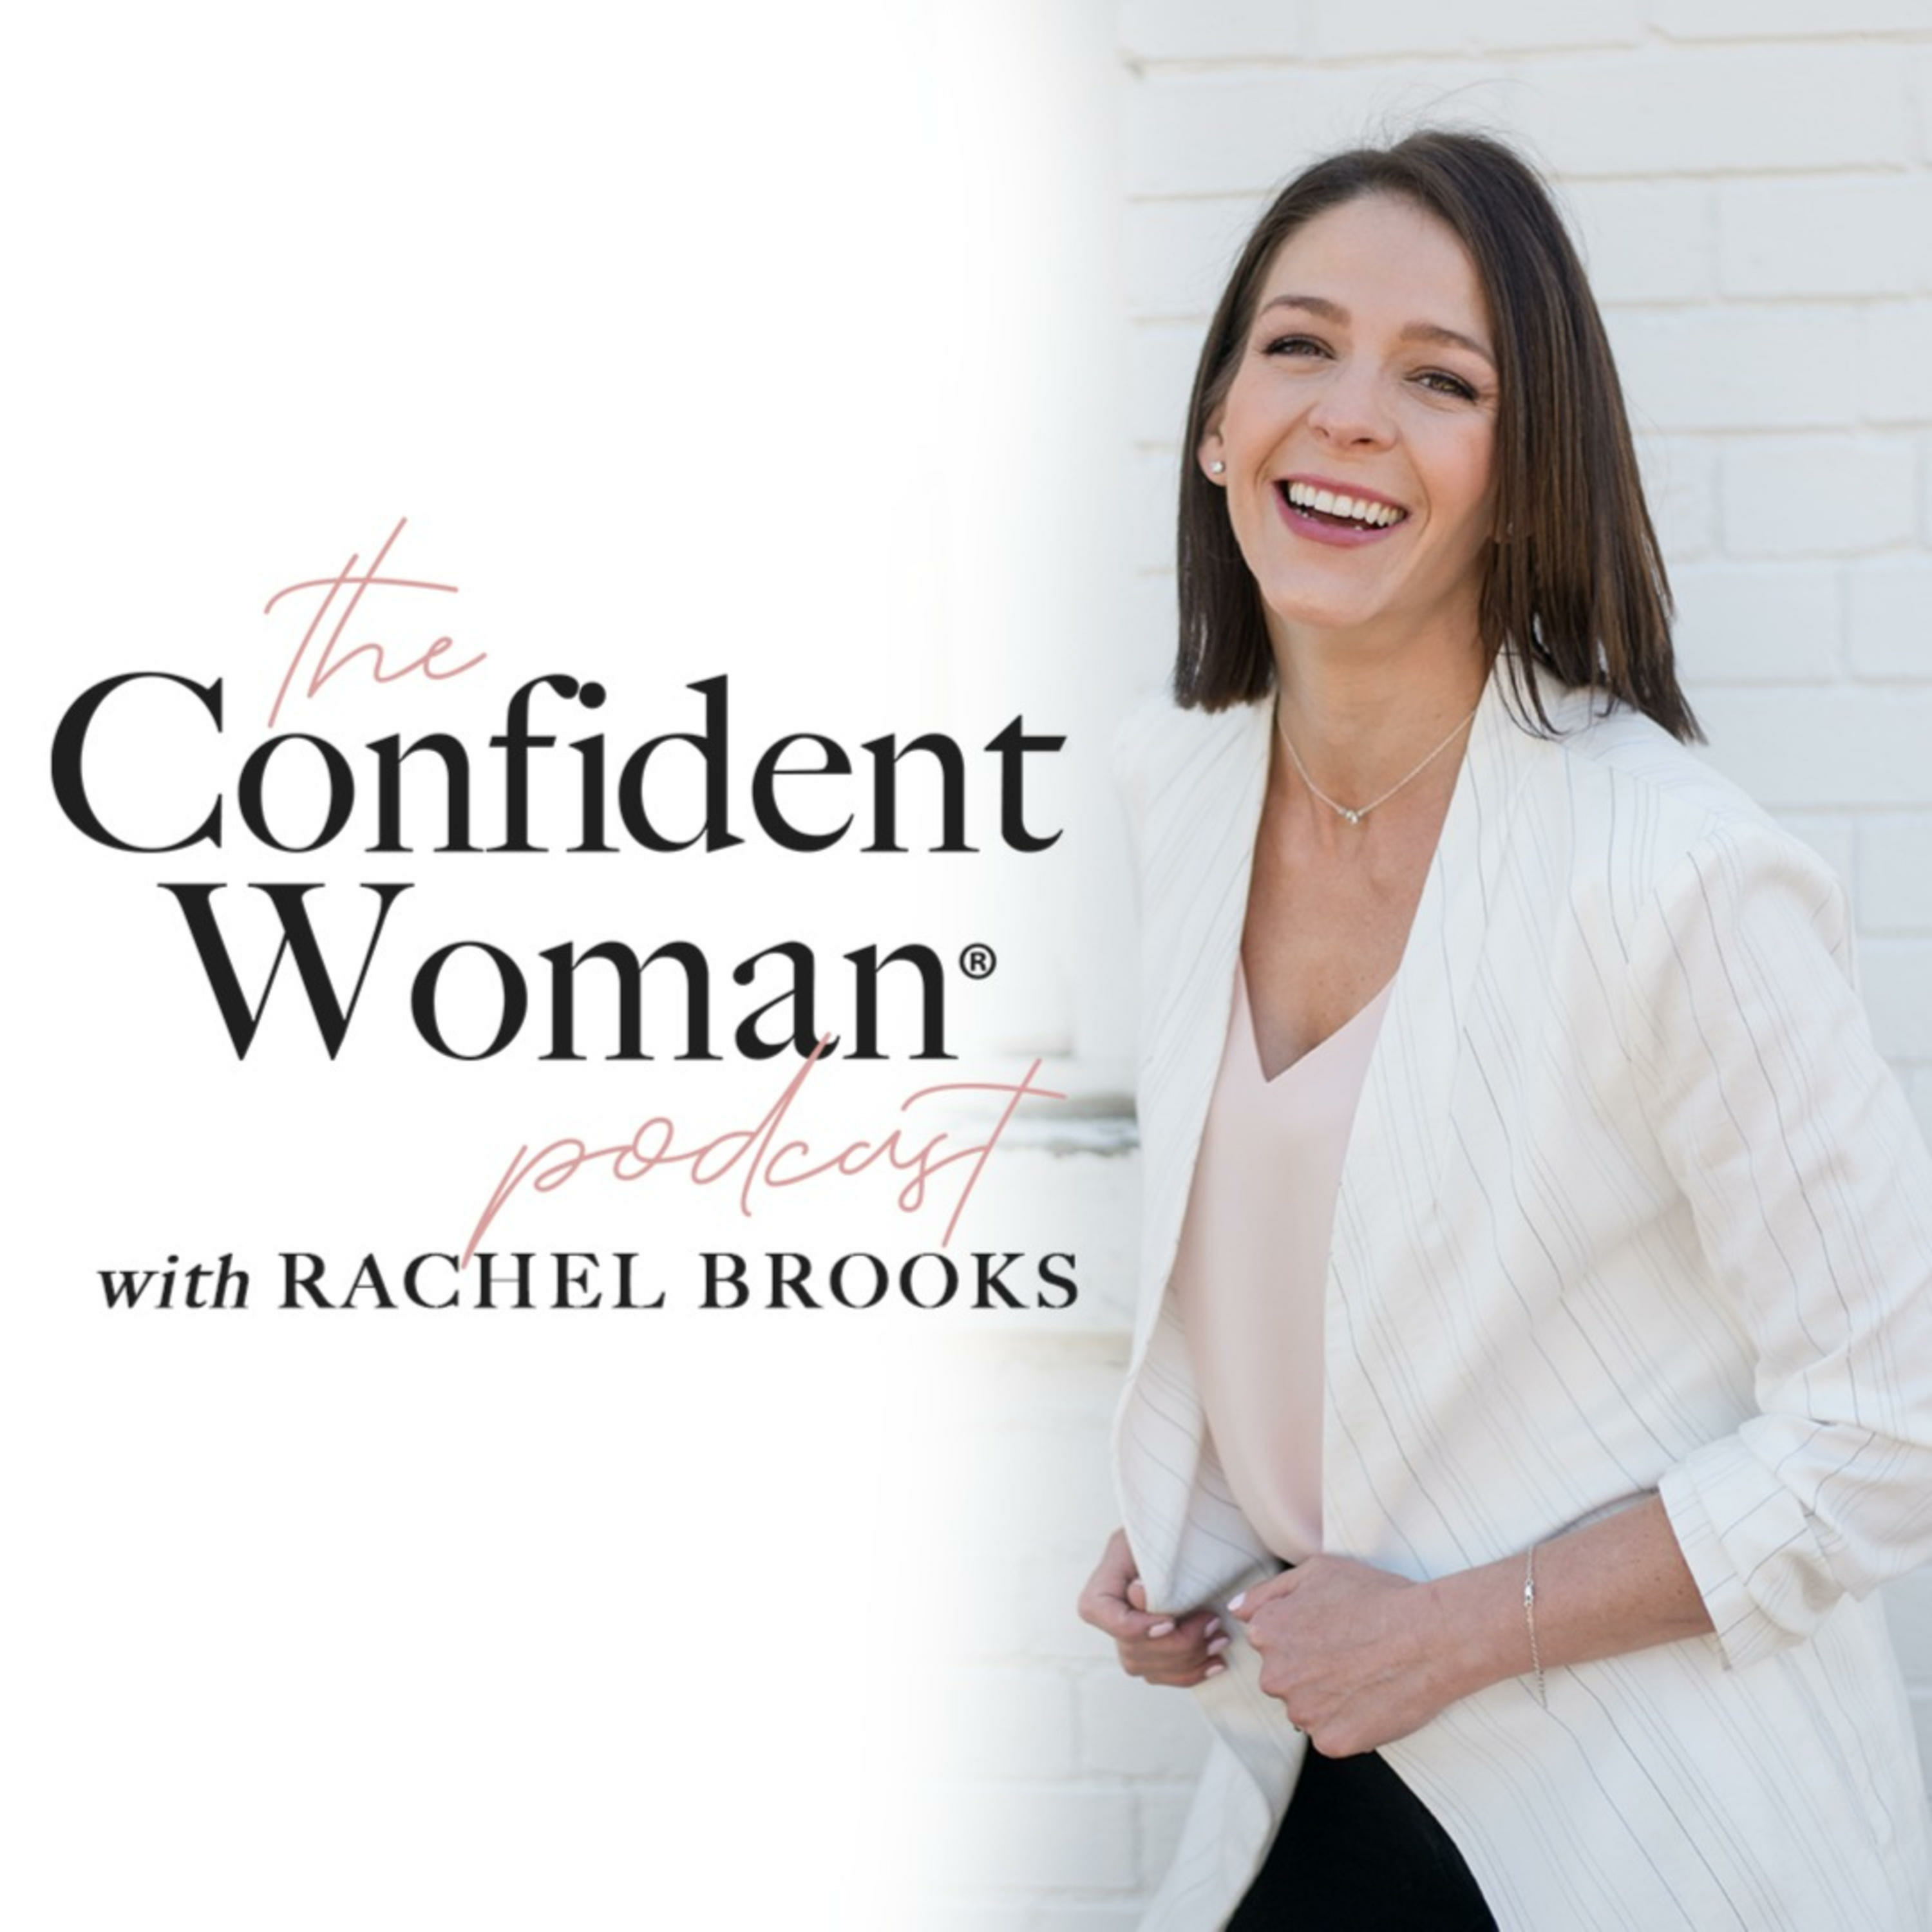 97: Growing Your Business with Authenticity and Ease with Molly Hillenbrand